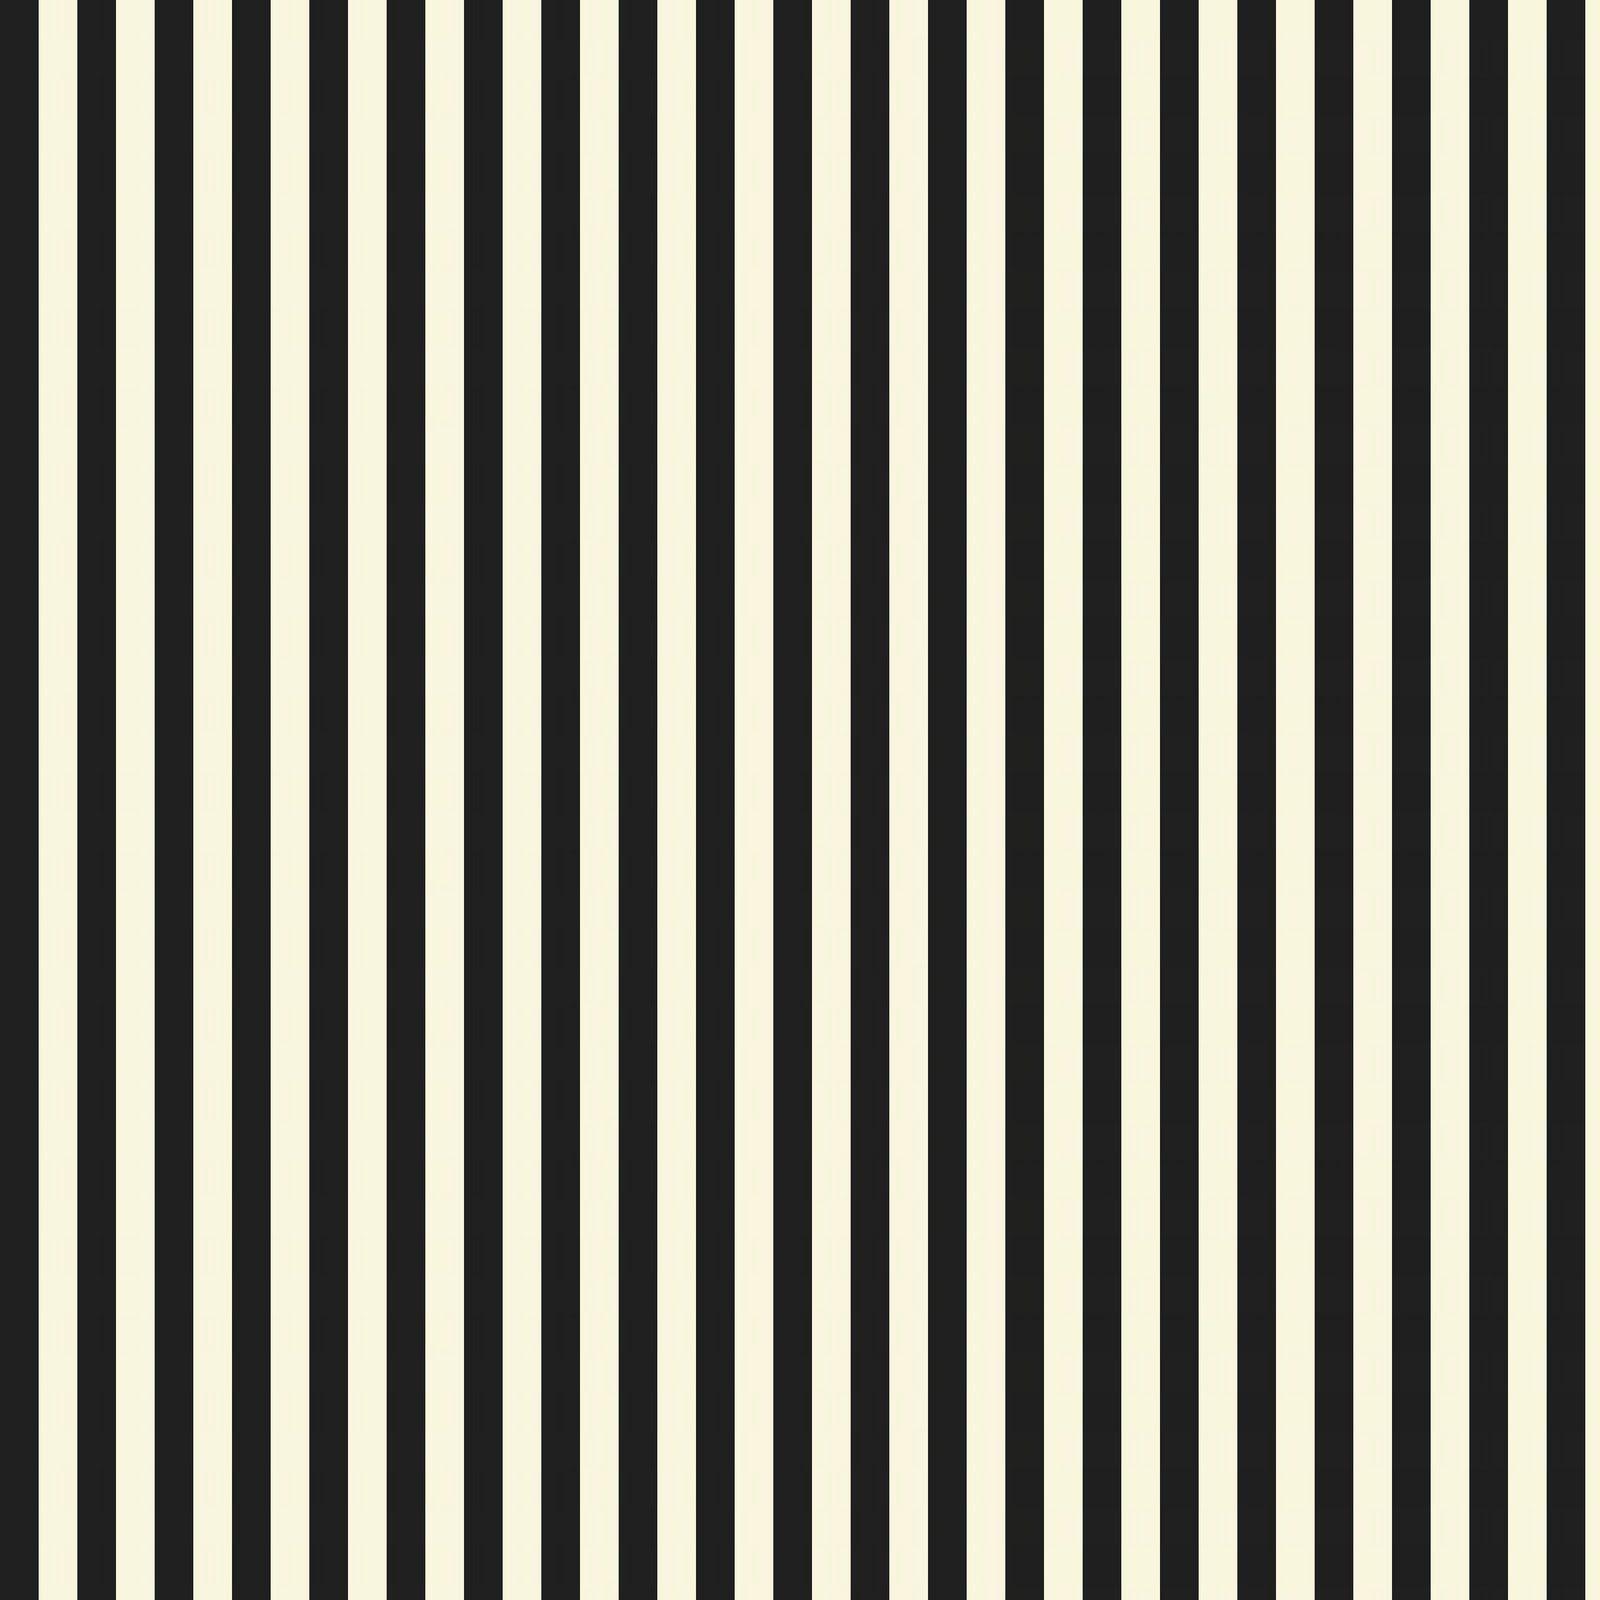 Black and White Stripes Wallpapers - Top Free Black and White Stripes ...